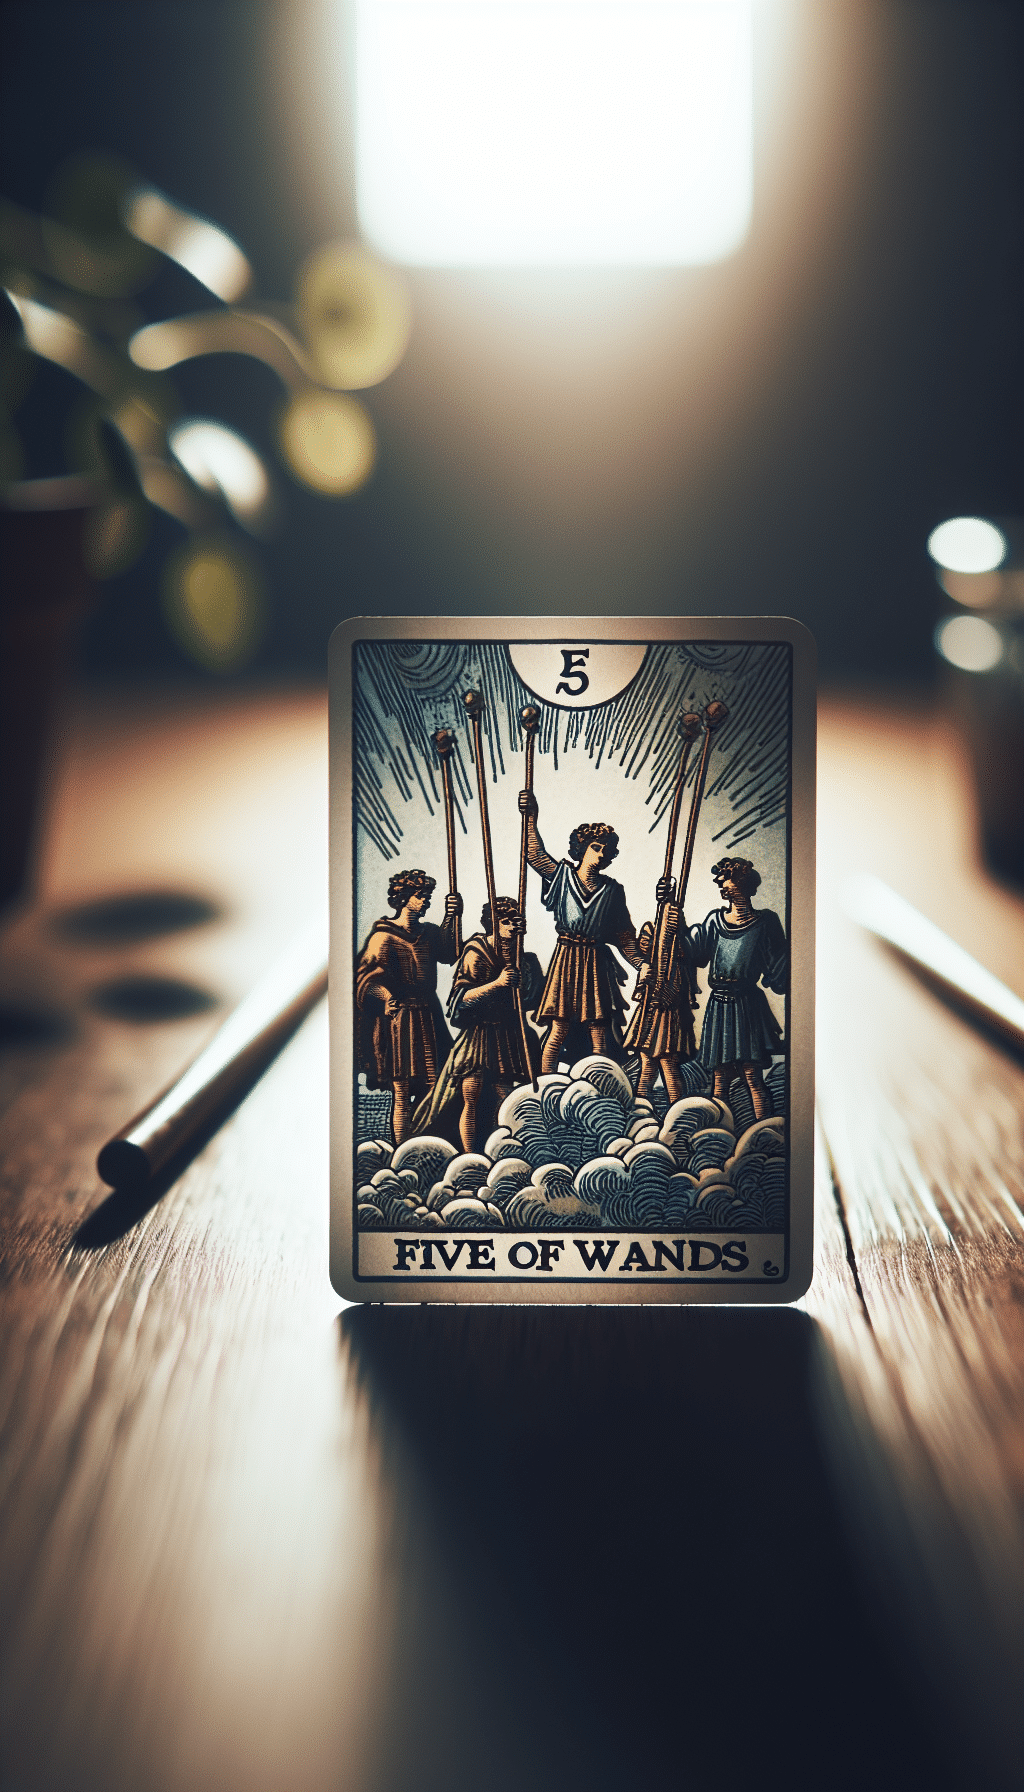 Deciphering Conflict: The Five of Wands in Decision Making